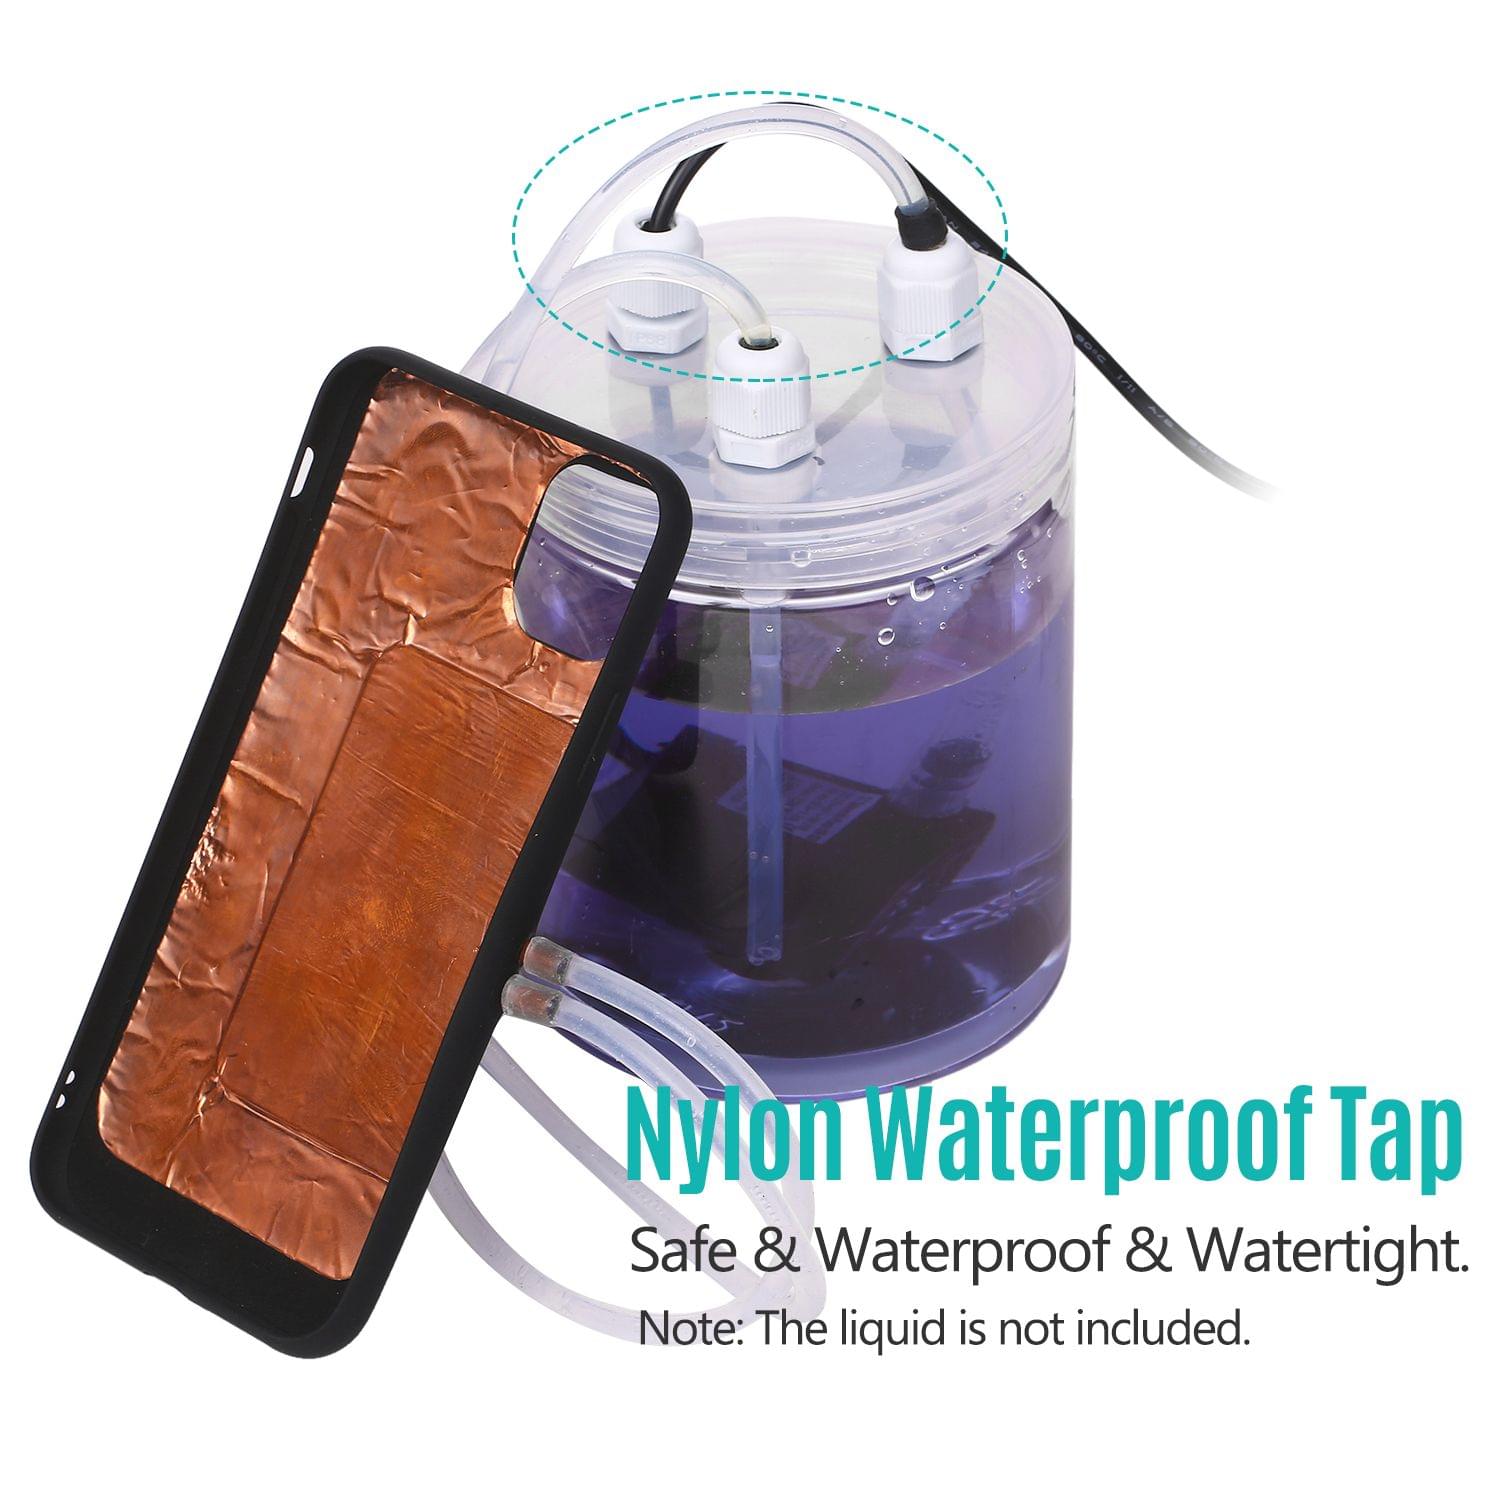 Phone Cooler Mobile Phone Radiator Water-cooled Cooling - Compatible with iPhone 11 6.5inch